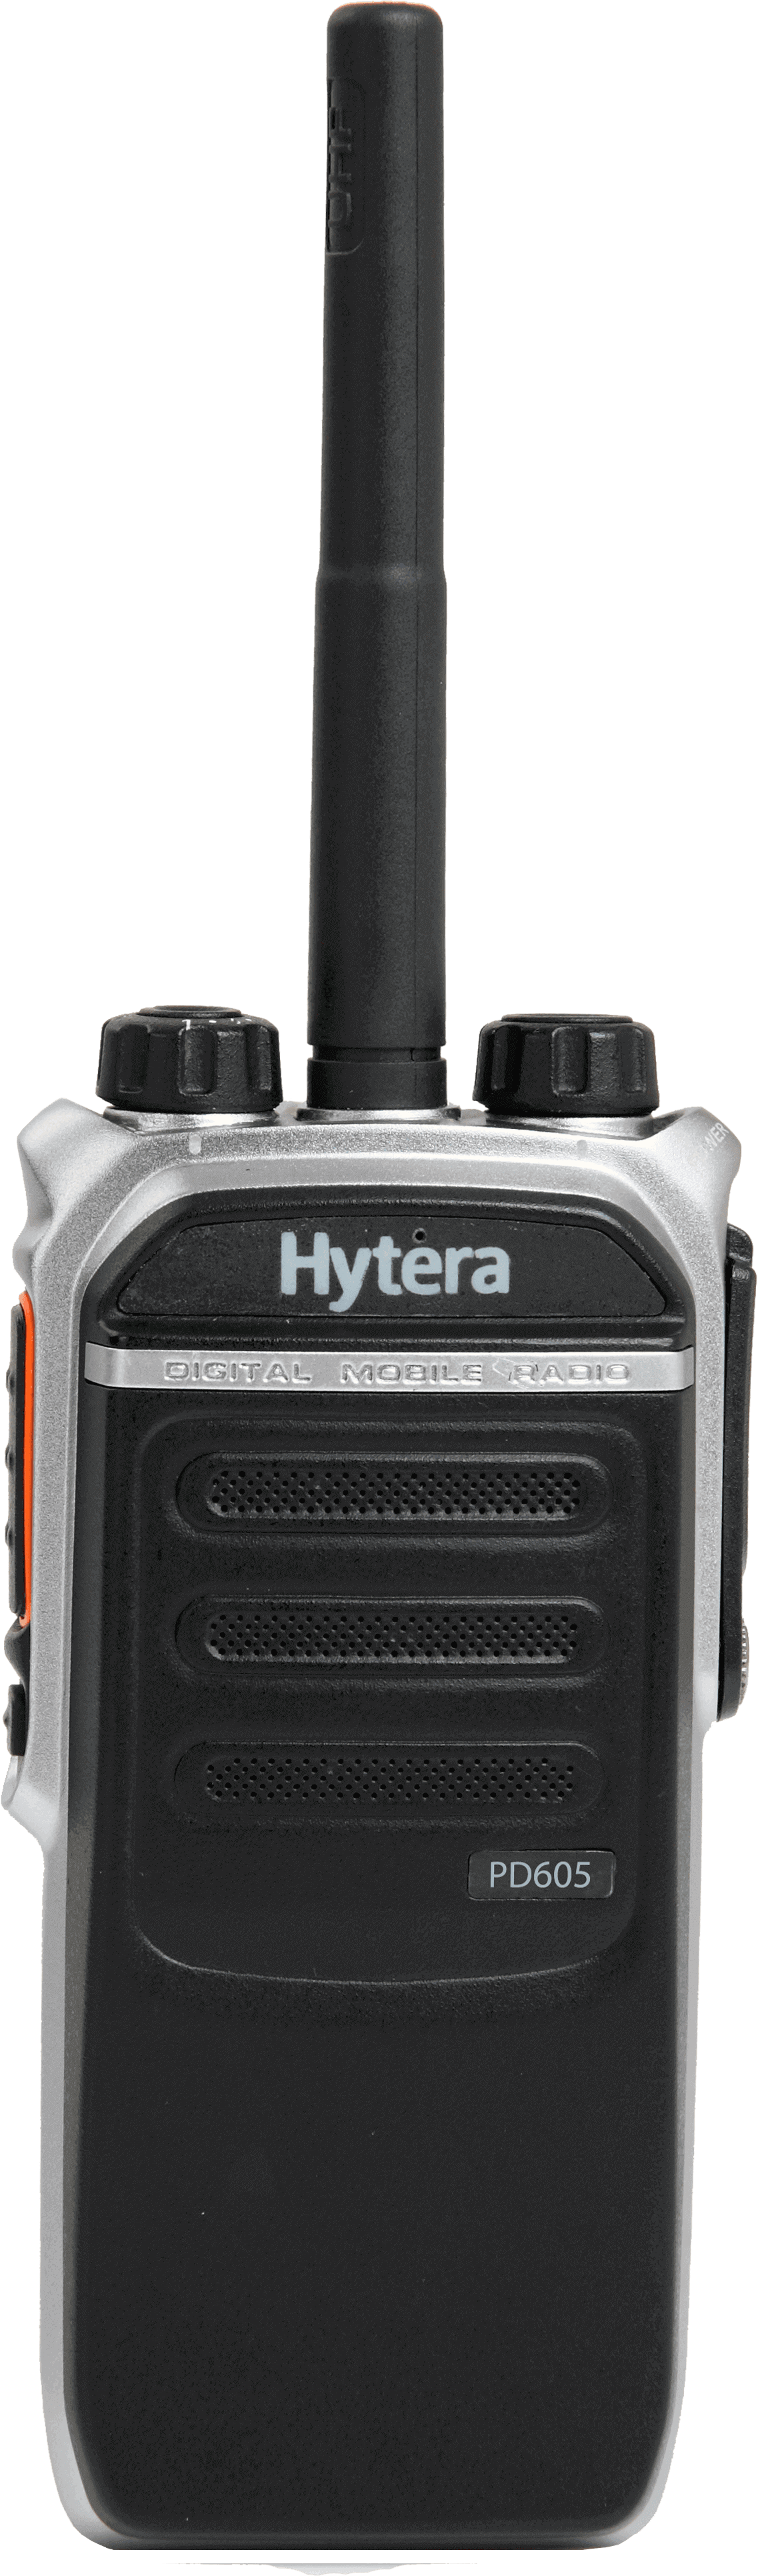 Hytera PD605G featured image